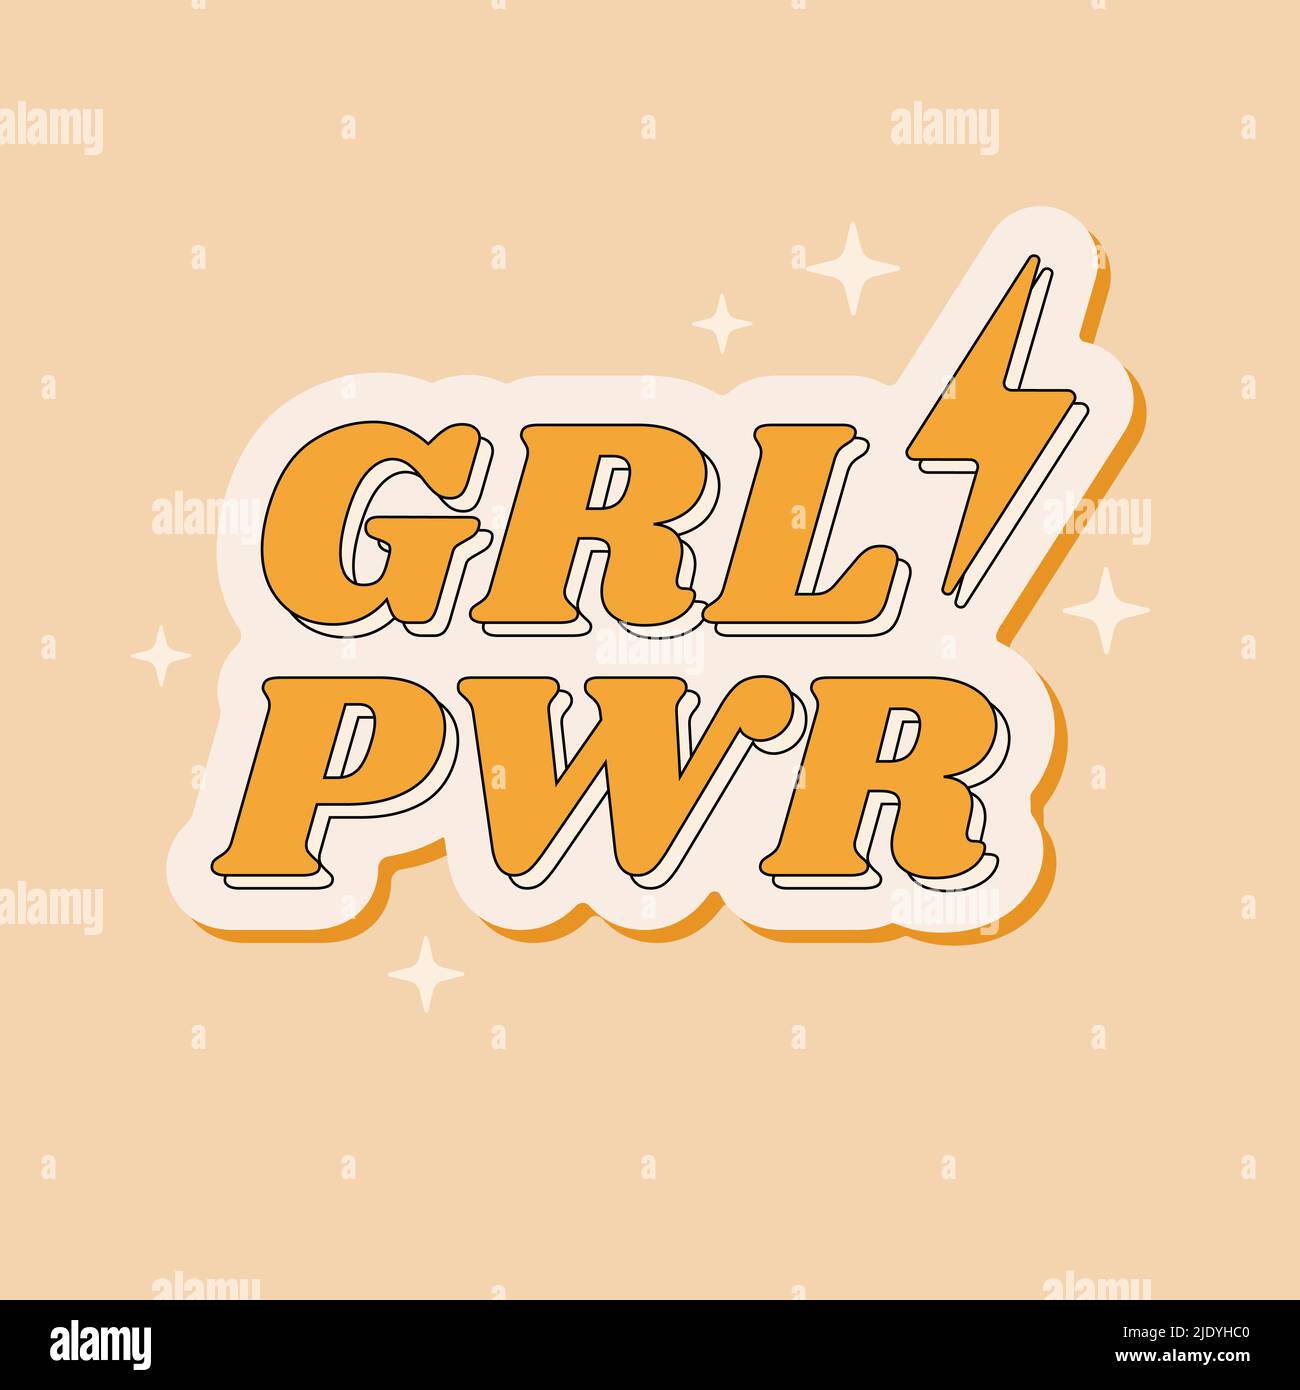 Woman motivational inscription GRL PWR - Girl Power in retro 1970s style. Feminist slogan for cards, posters, t-shirt. Vector illustration. Stock Vector